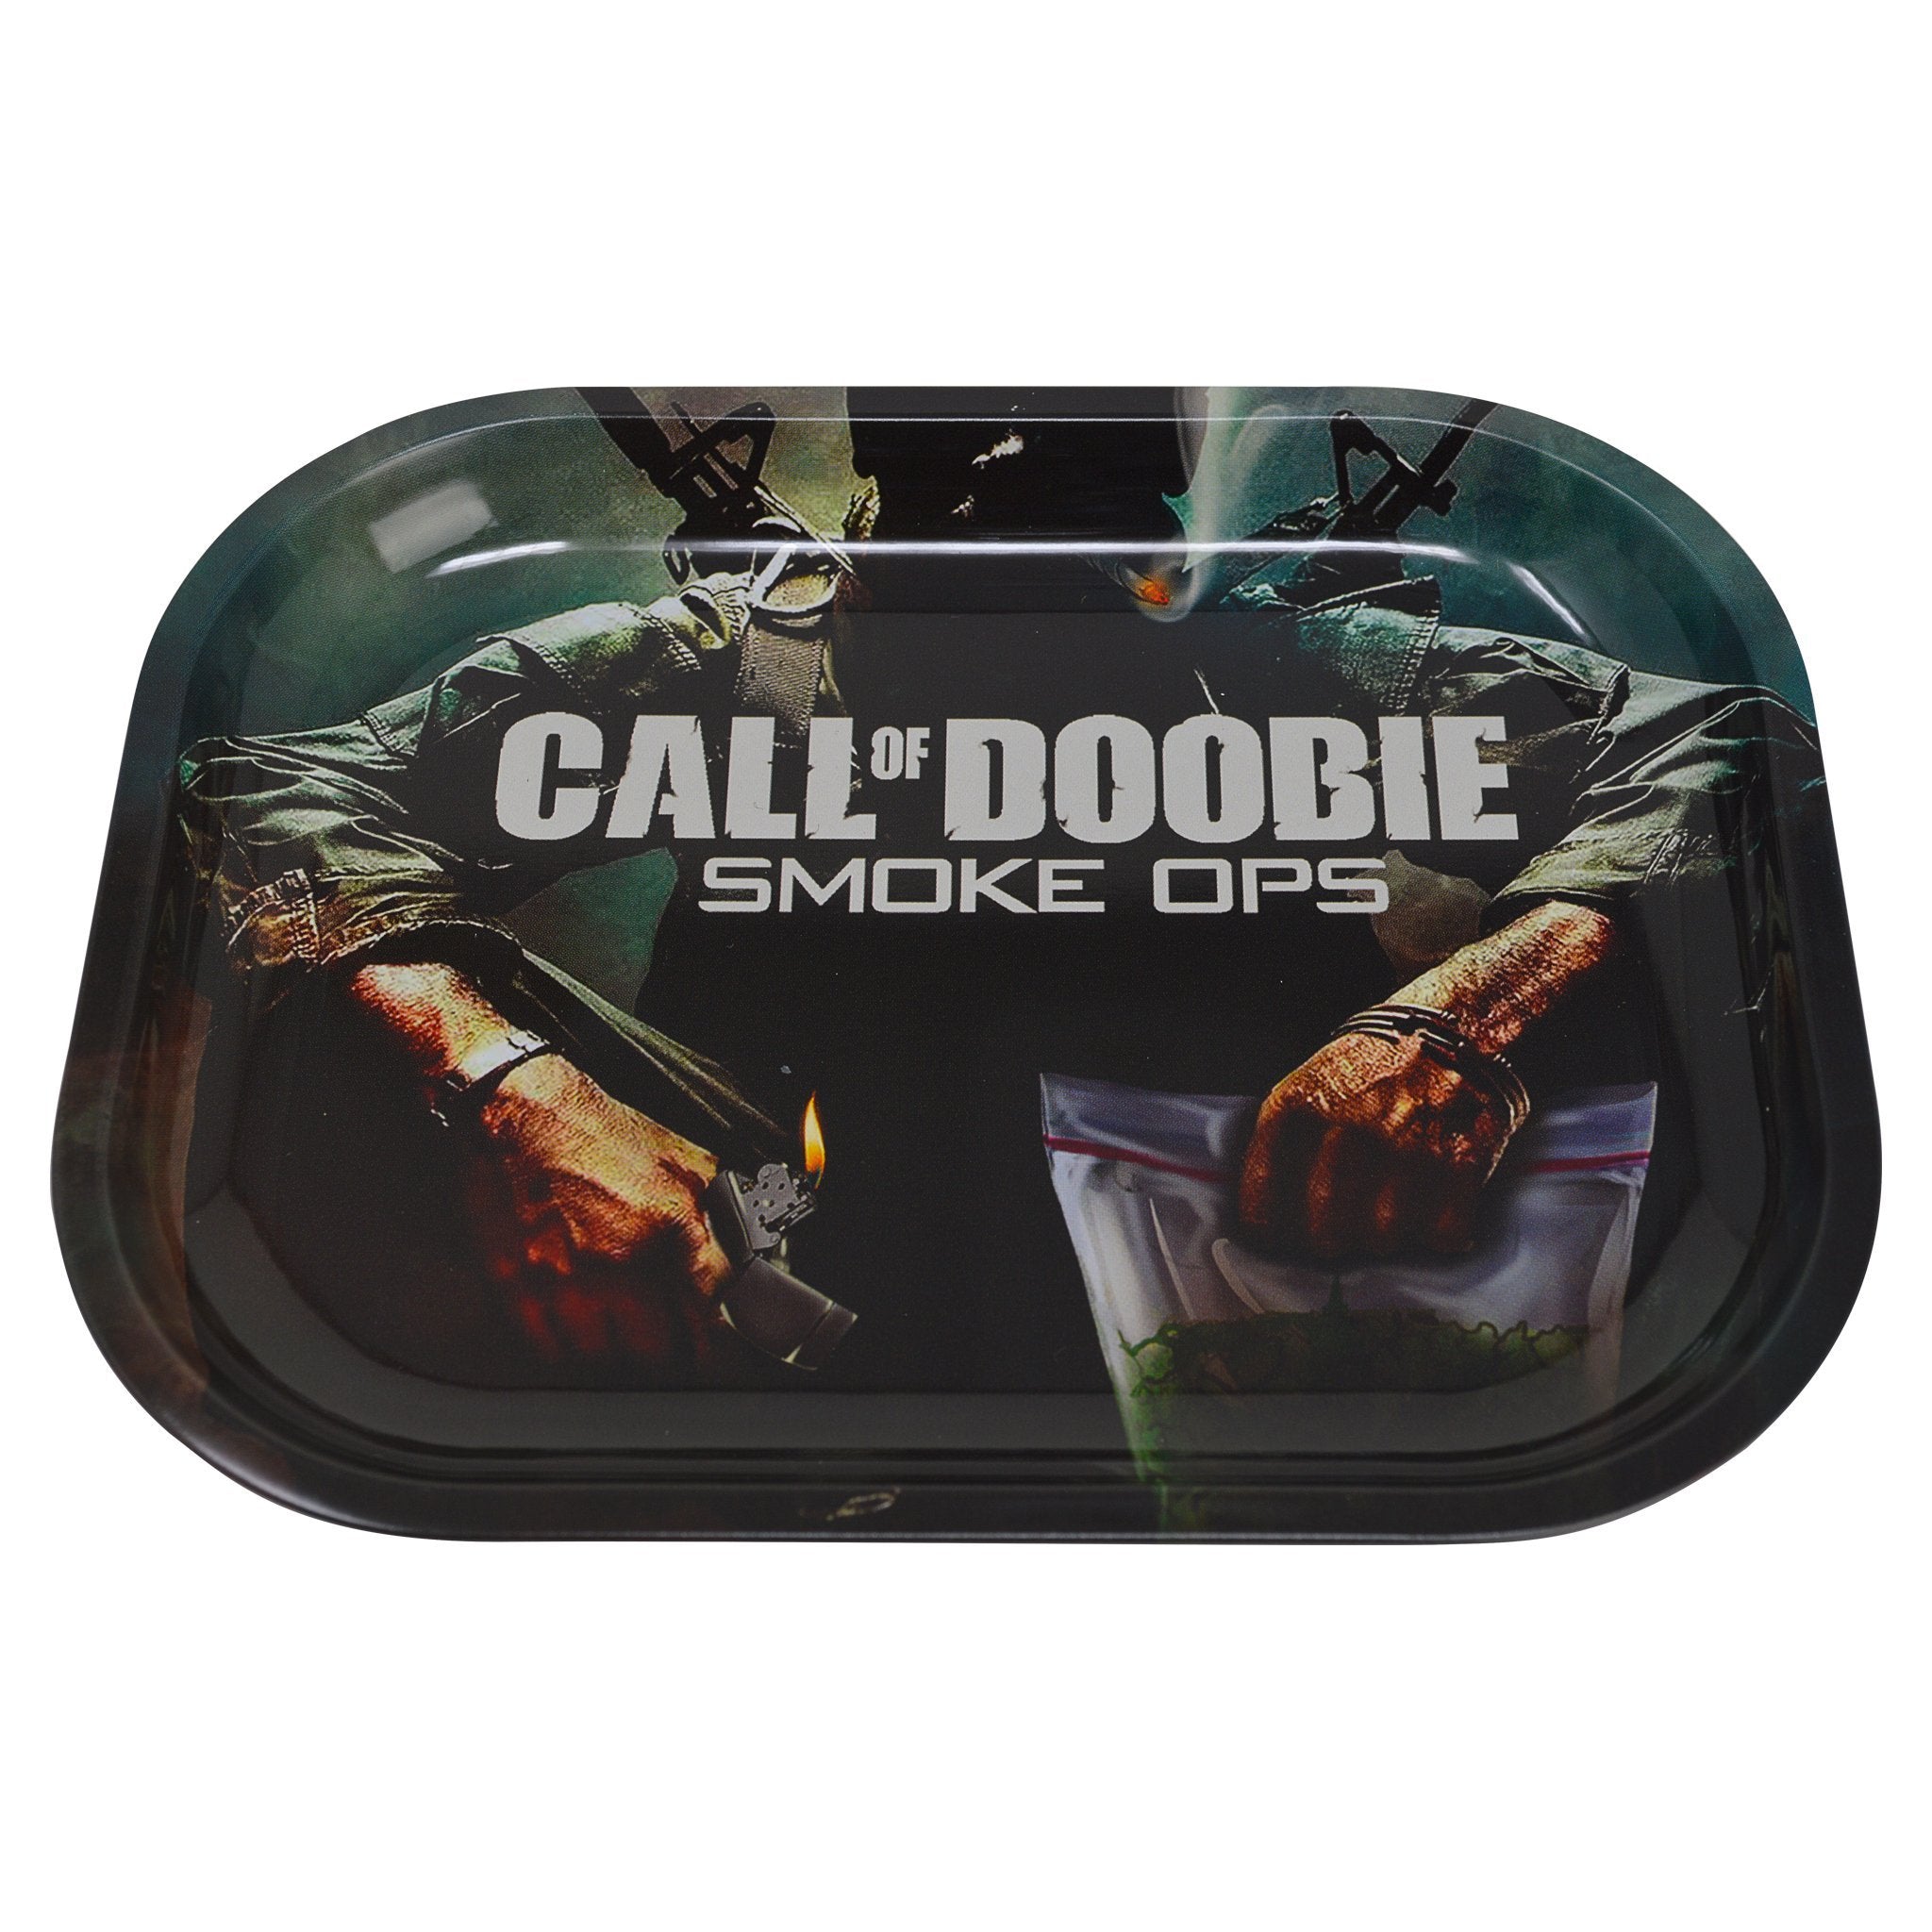 Handy rolling tray smoking accessory Call of Duty video game themed soldier holding weed lighter design